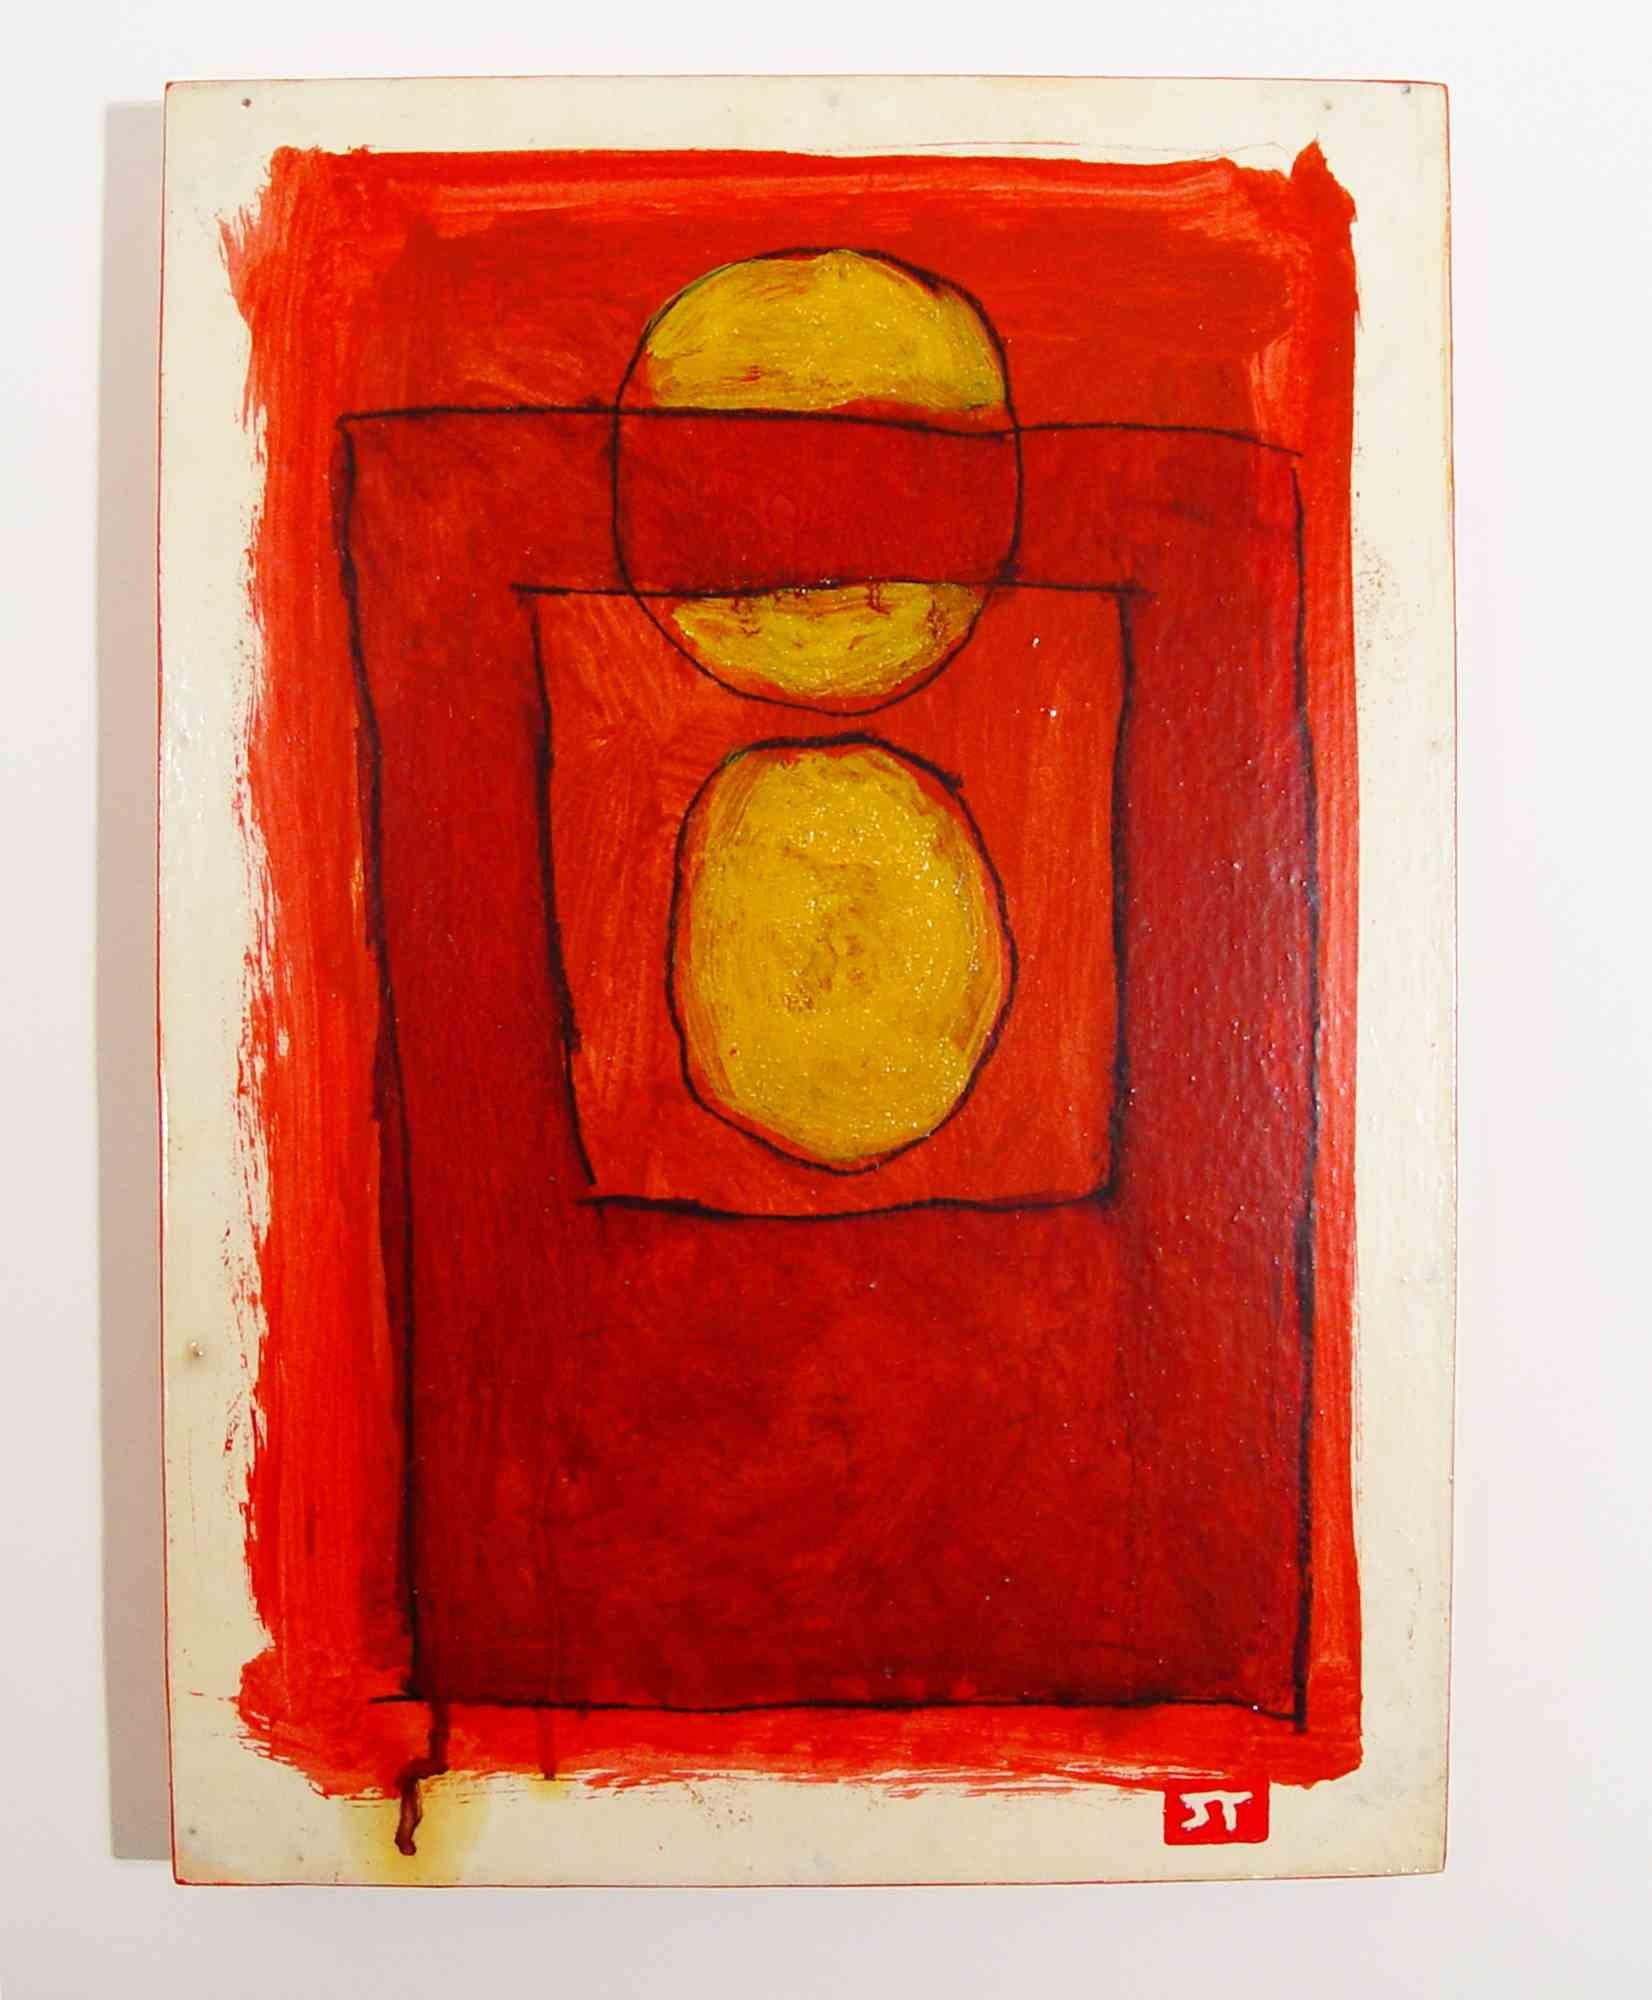 Intersections 3 is an original painting realized by the Italian artist Salvatore Travascio in the 2010s.

This is a beautiful oil painting on paper on wooden support. Hand-signed on the lower right. Perfect conditions.

What has motivated the artist